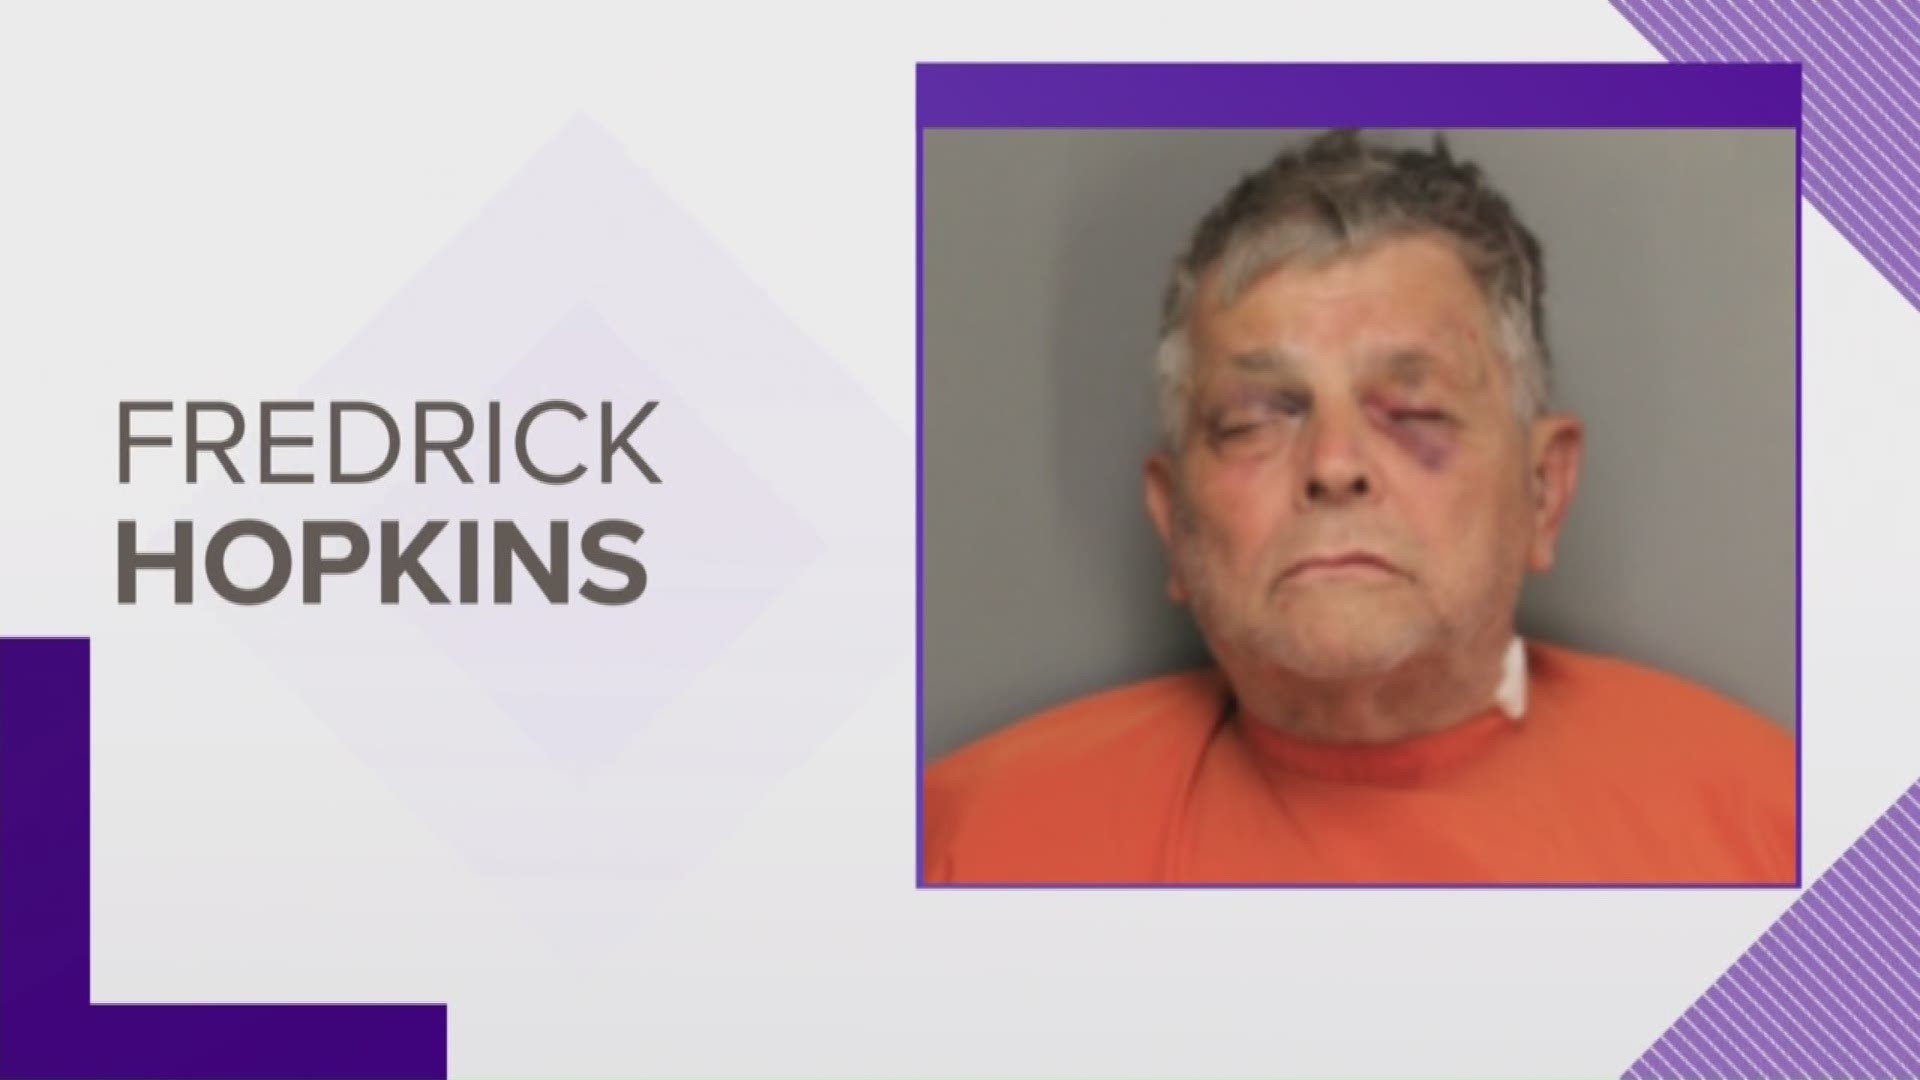 Fredrick Hopkins, 74, is charged with a second count of murder, he also faces 5 counts of attempted murder